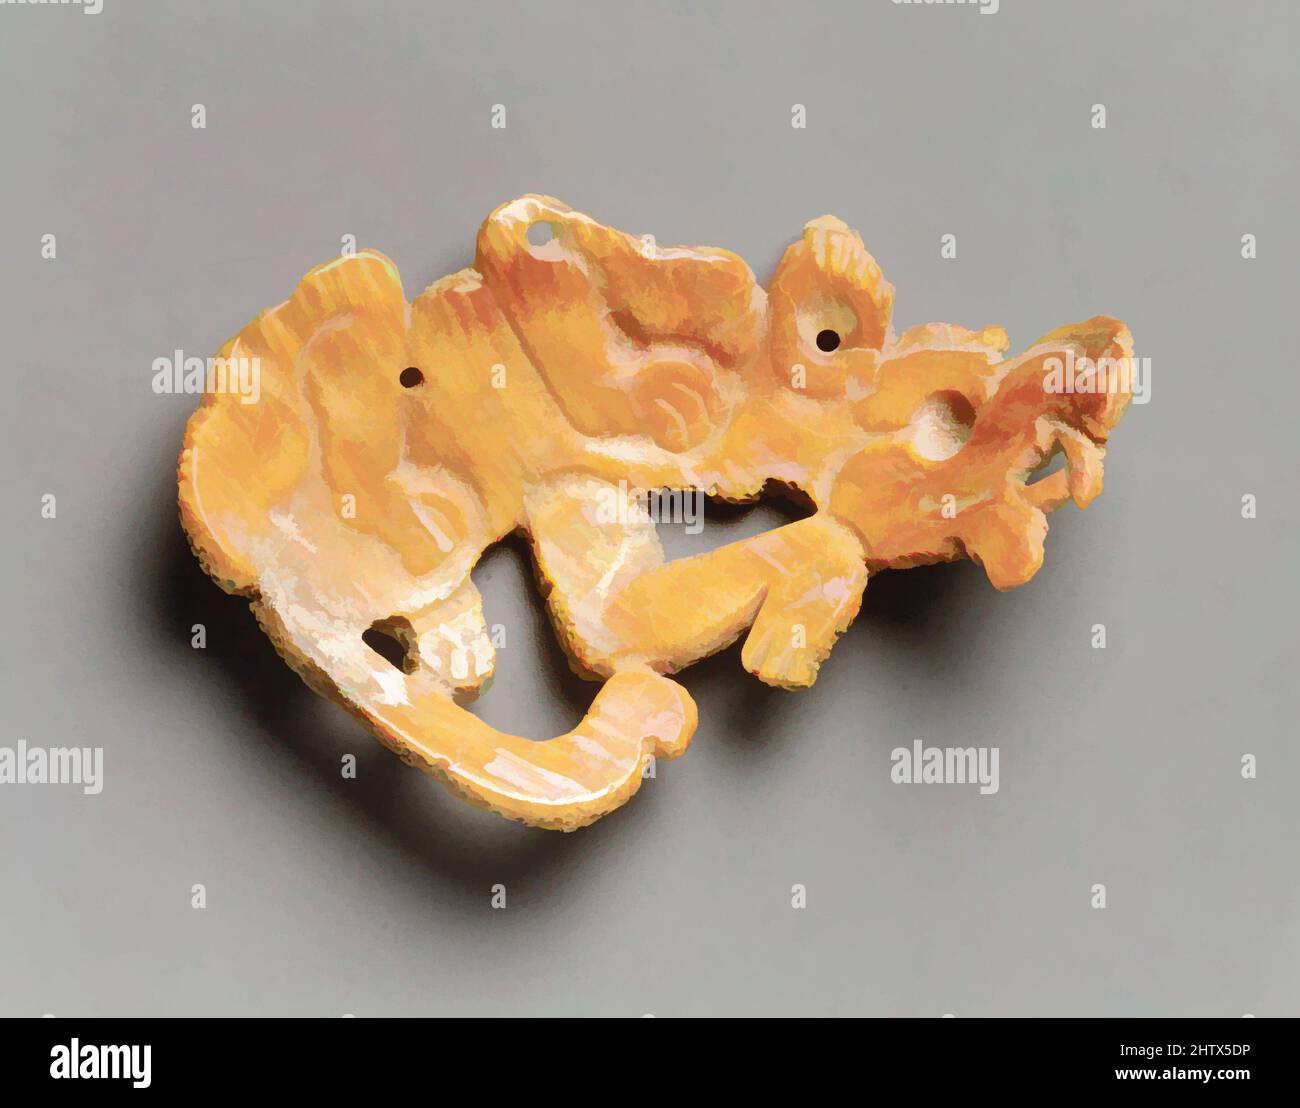 Art inspired by Canine Ornament, 7th–8th century, Guatemala or Mexico, Mesoamerica, Maya, Shell (Spondylus), H. 3 3/4 x W. 2 3/8 x D. 1 in. (9.5 x 6 x 2.5 cm), Shell-Ornaments, This orange shell pendant represents a dog. The dog seems to snarl as it raises its snout to expose sharp, Classic works modernized by Artotop with a splash of modernity. Shapes, color and value, eye-catching visual impact on art. Emotions through freedom of artworks in a contemporary way. A timeless message pursuing a wildly creative new direction. Artists turning to the digital medium and creating the Artotop NFT Stock Photo